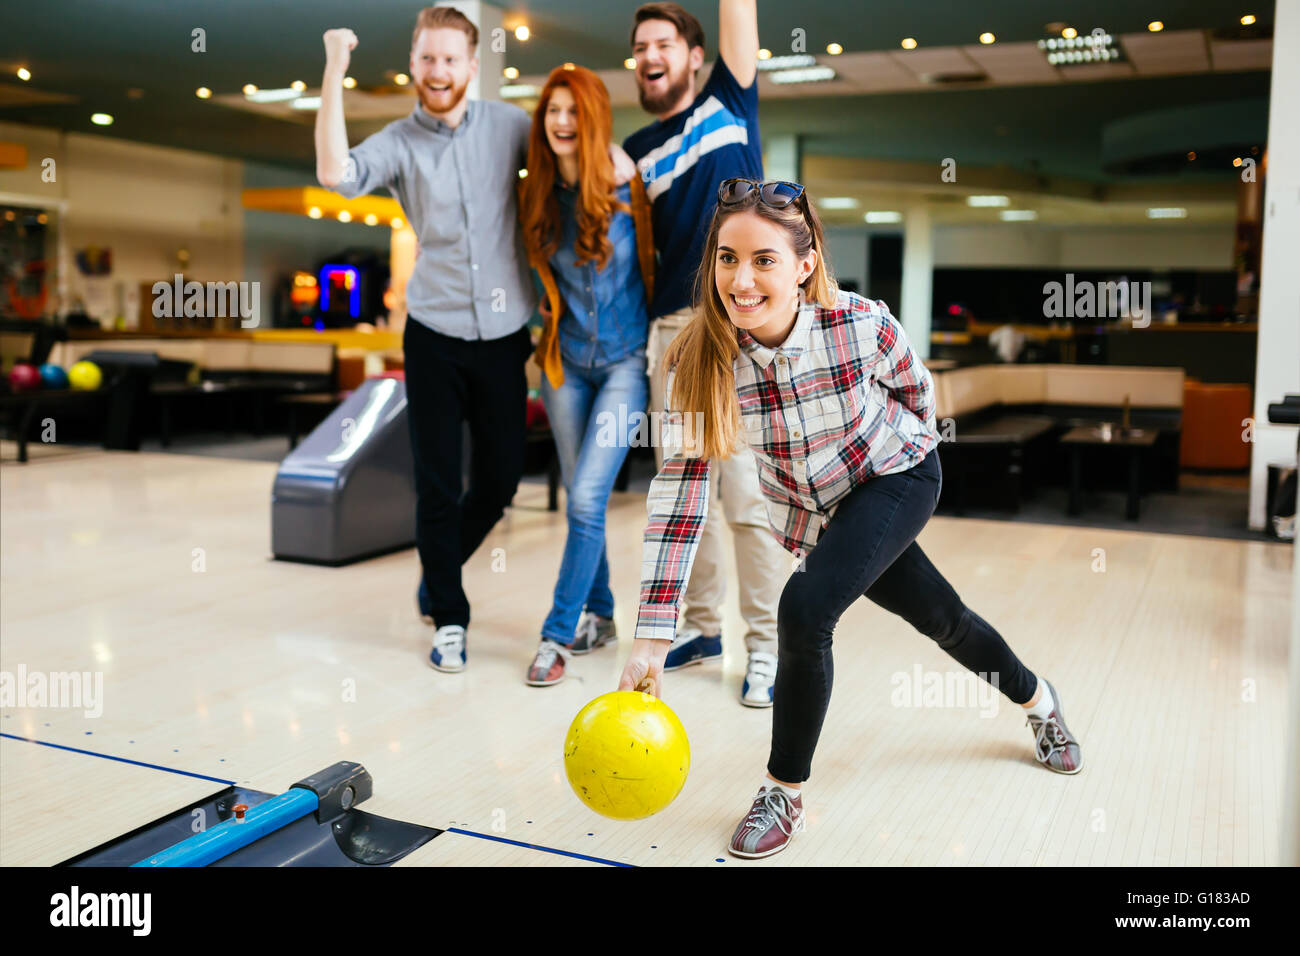 Friends having great time playing bowling and laughing Stock Photo